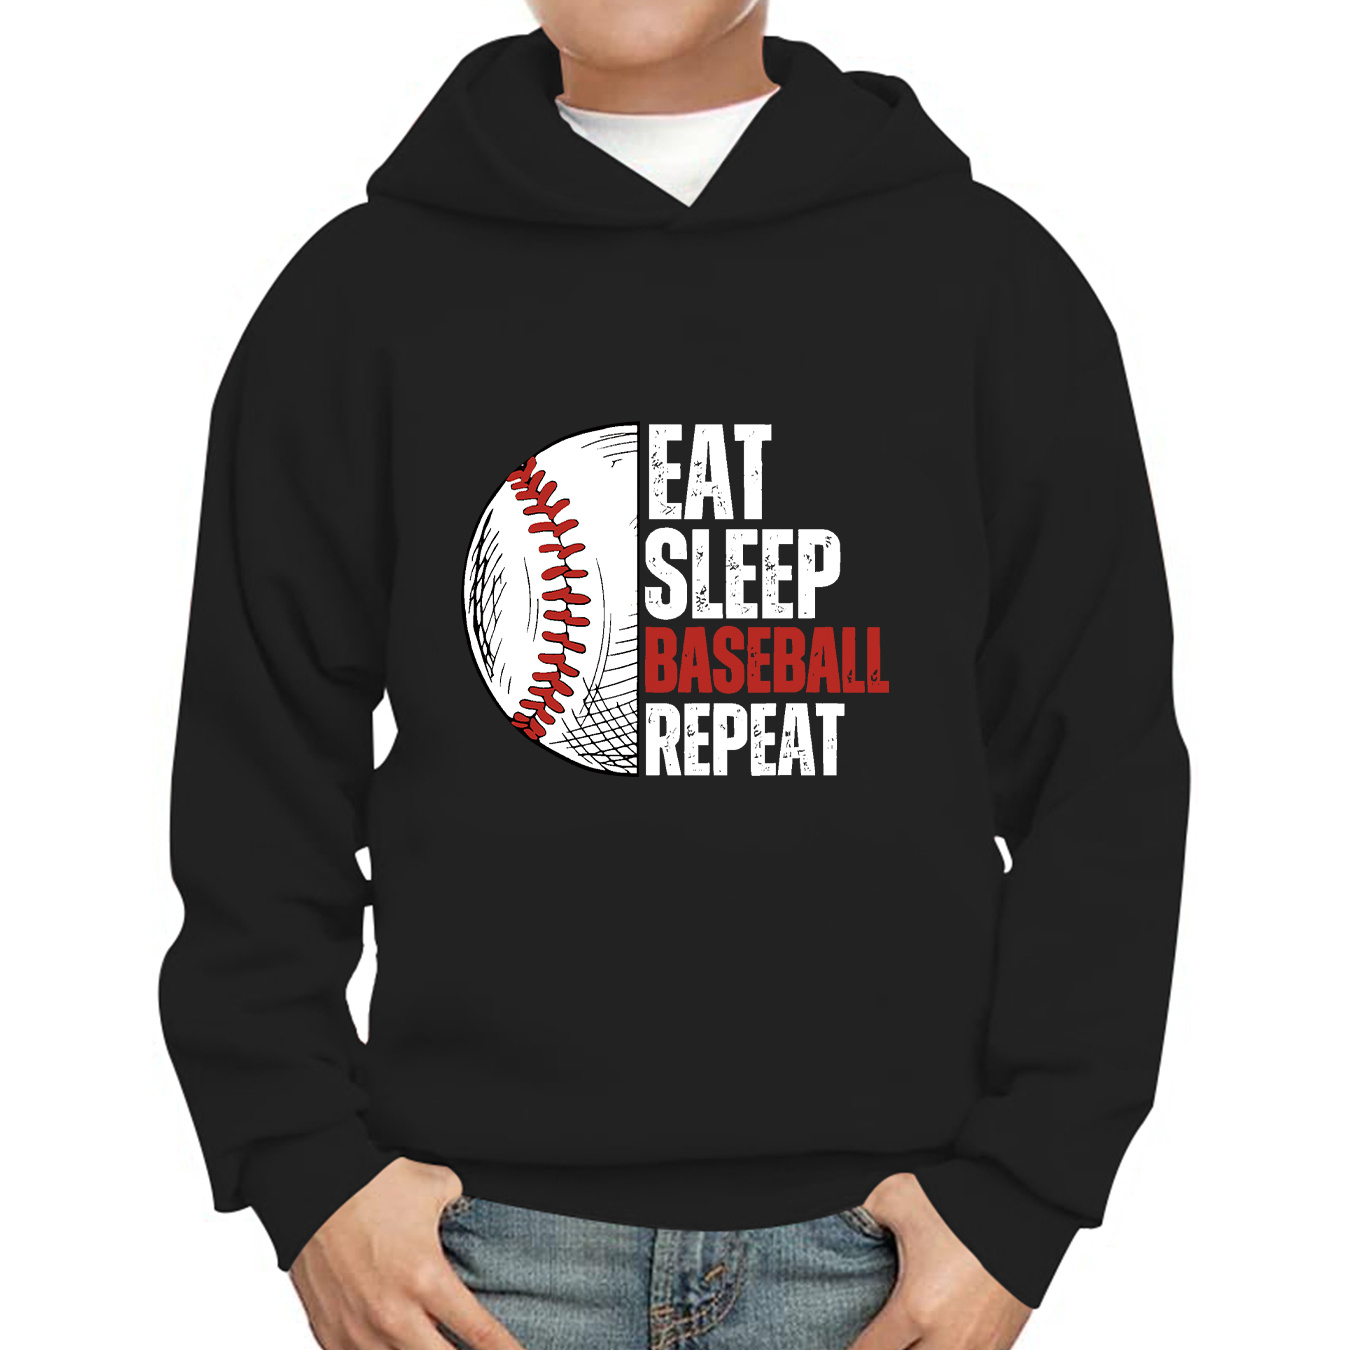 

Eat Sleep Baseball Repeat Letter Print Hoodies For Boys - Casual Graphic Design With Stretch Fabric For Comfortable Autumn/winter Wear